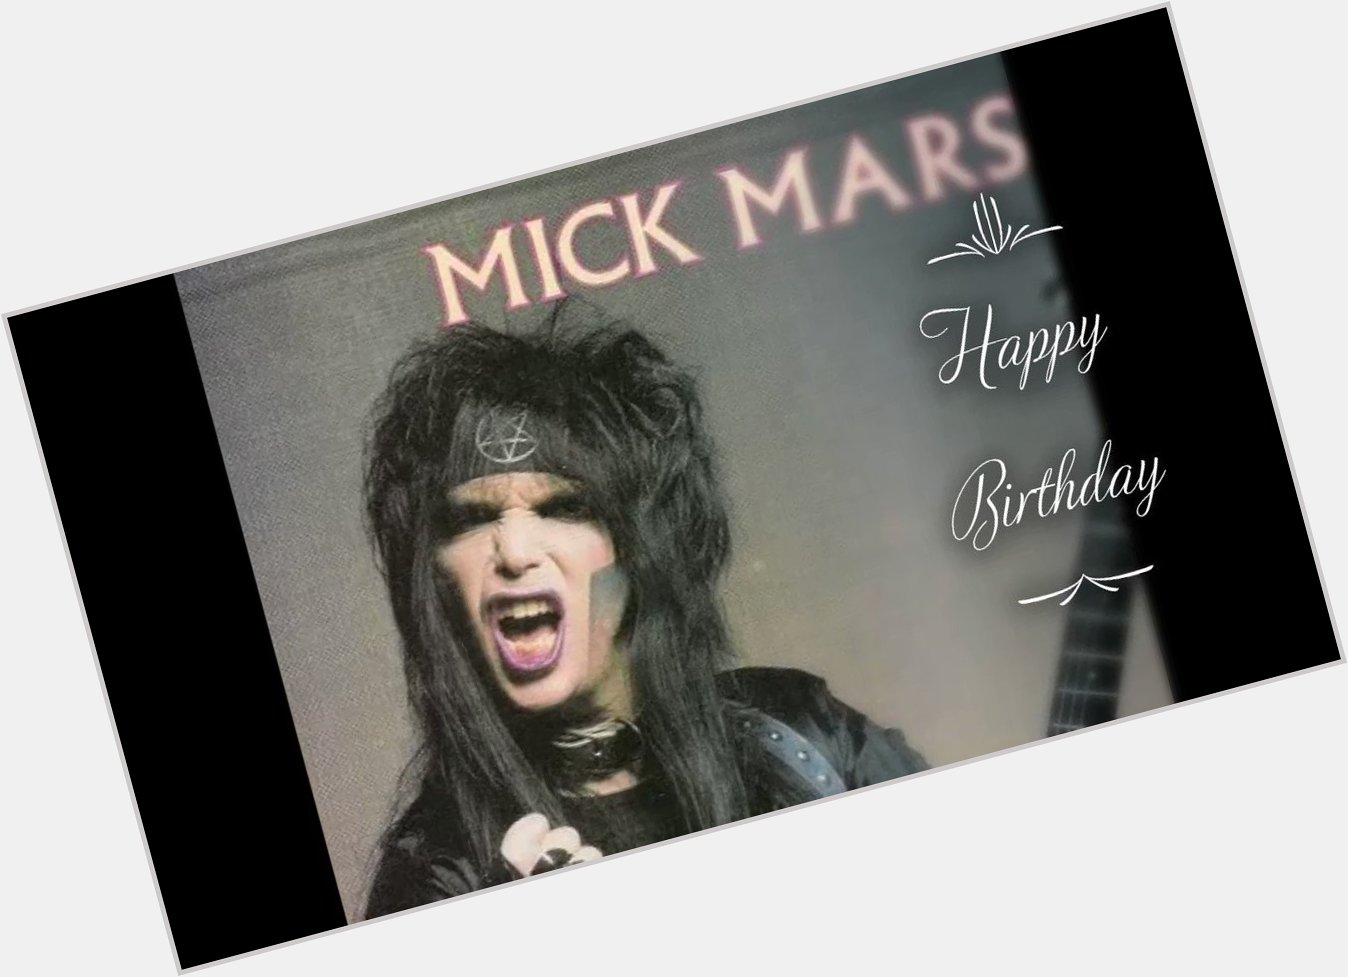 Happy Birthday Have a Wonderful Day       by Mick Mars  